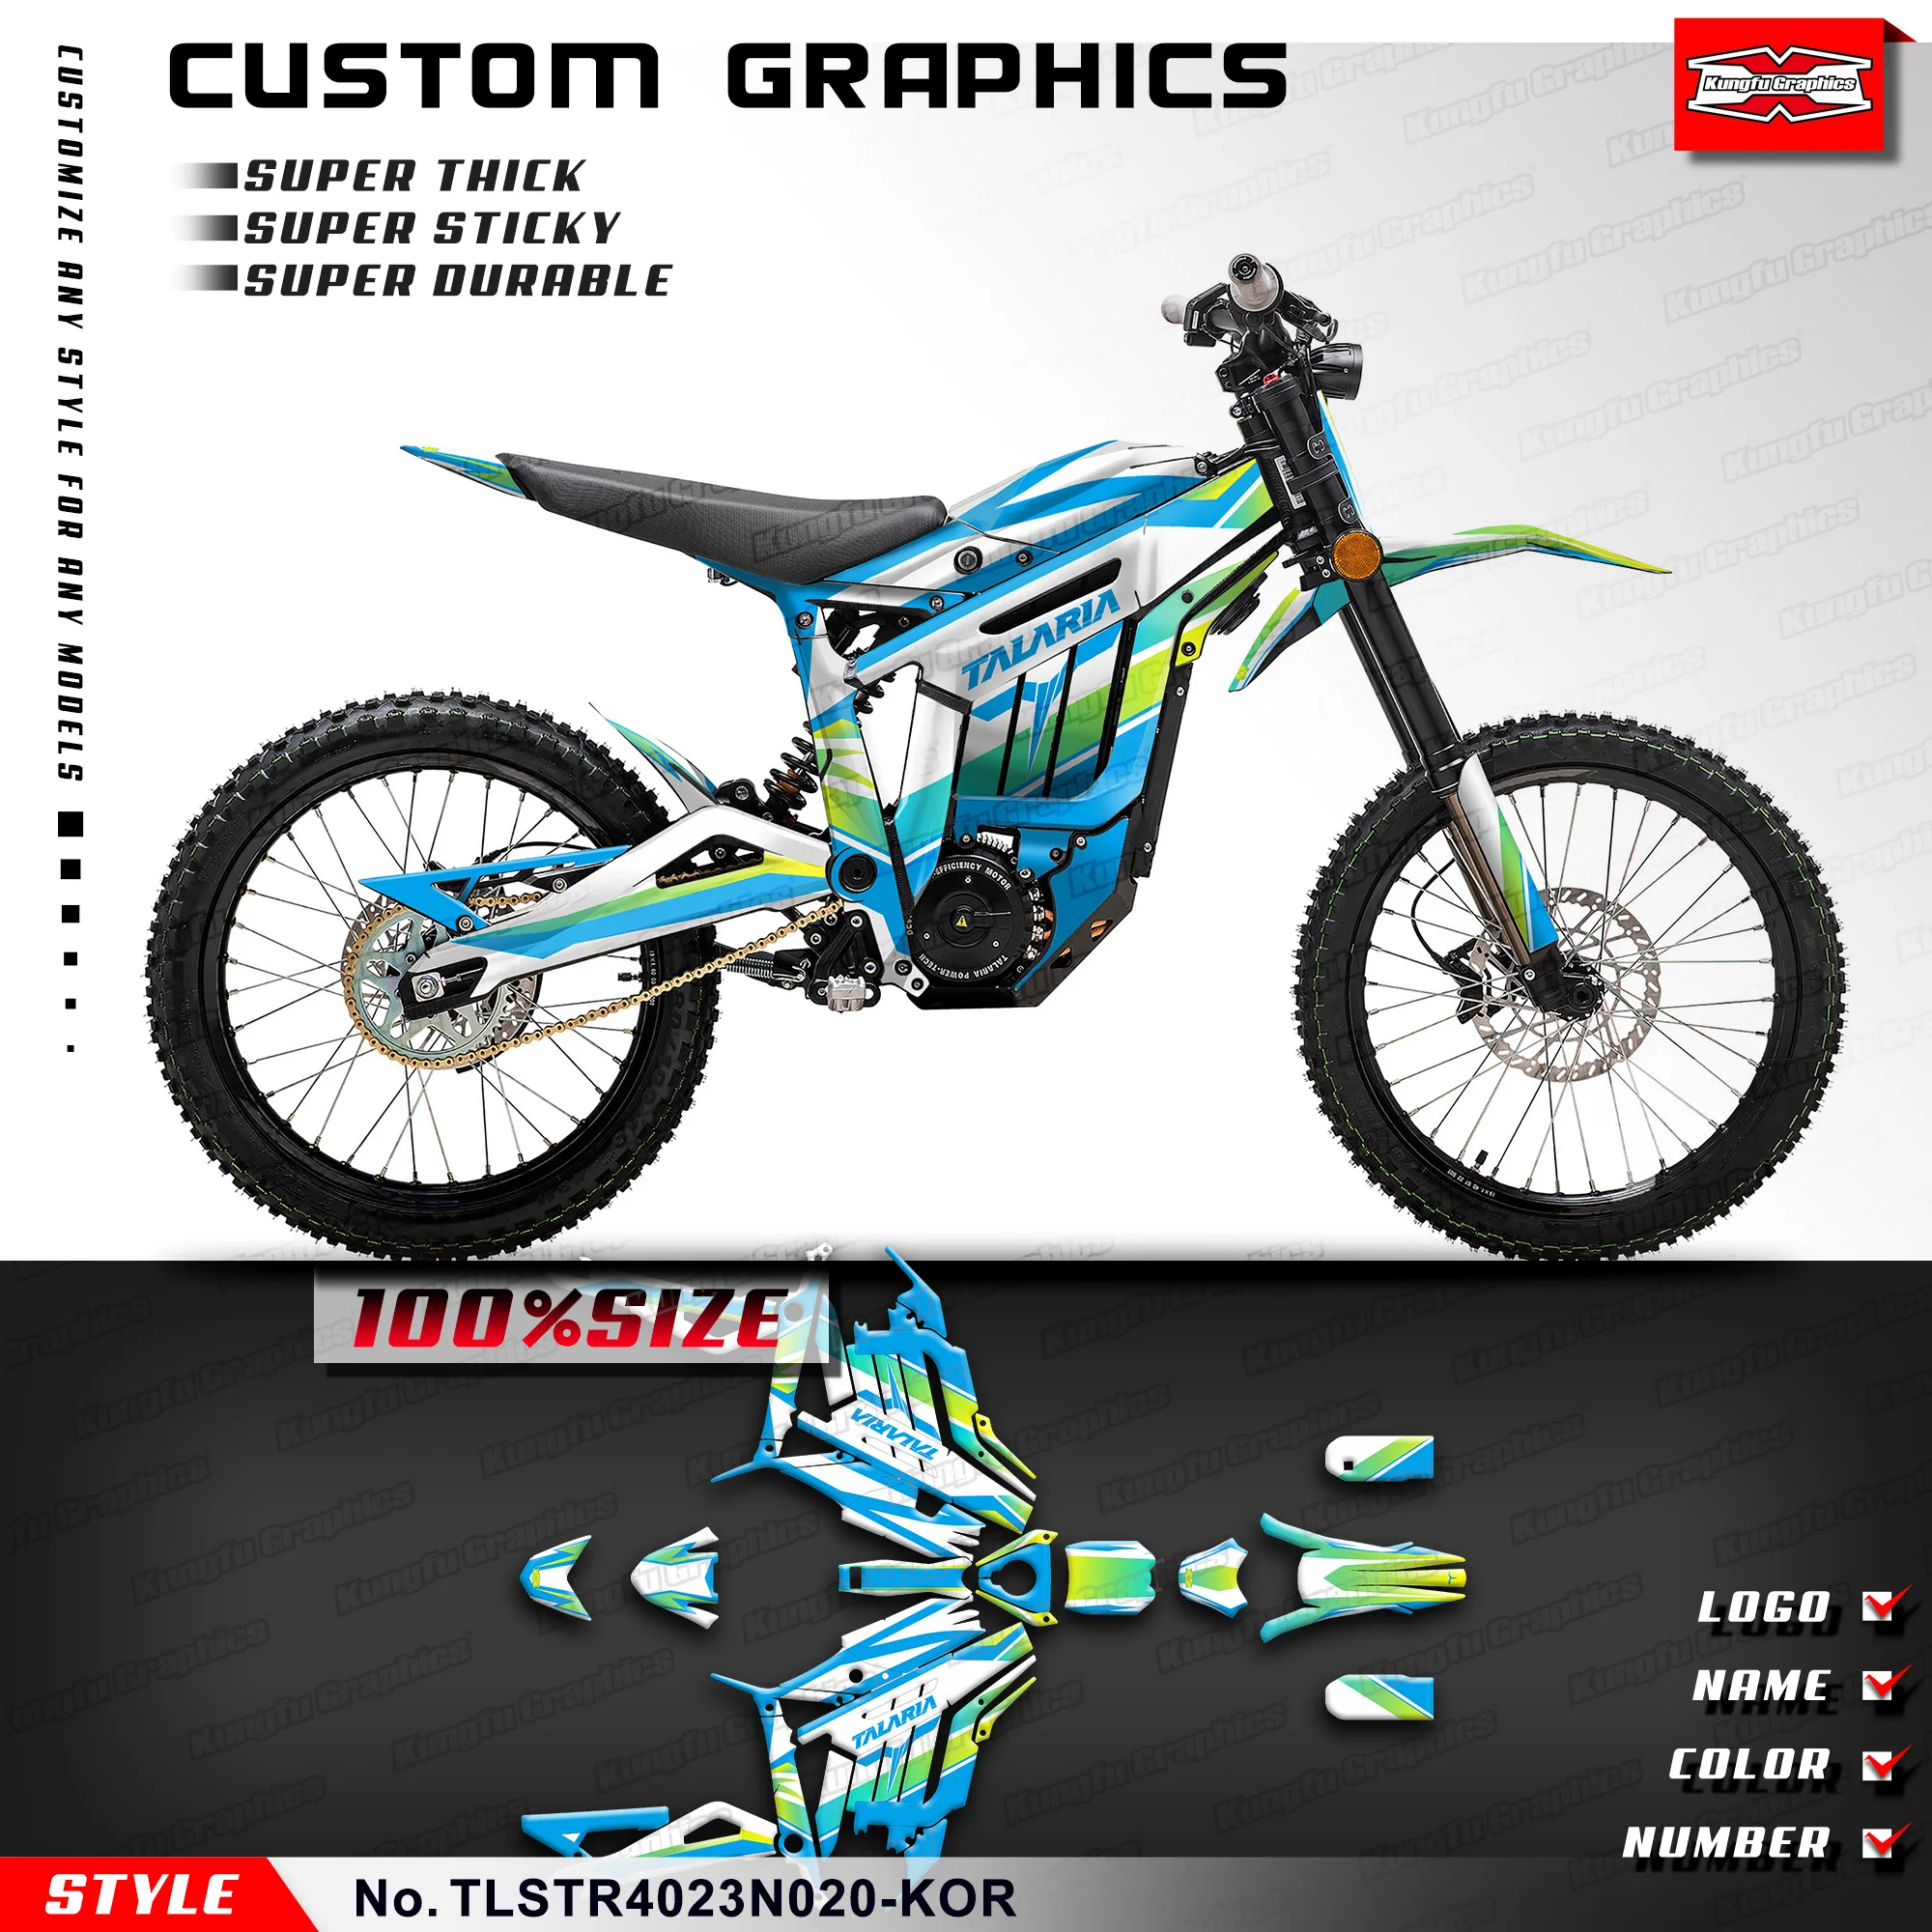 KUNGFU GRAPHICS Restyle Stickers Motocross Decal Kit for TALARIA Sting R MX L1E SX3 Dirt eBike